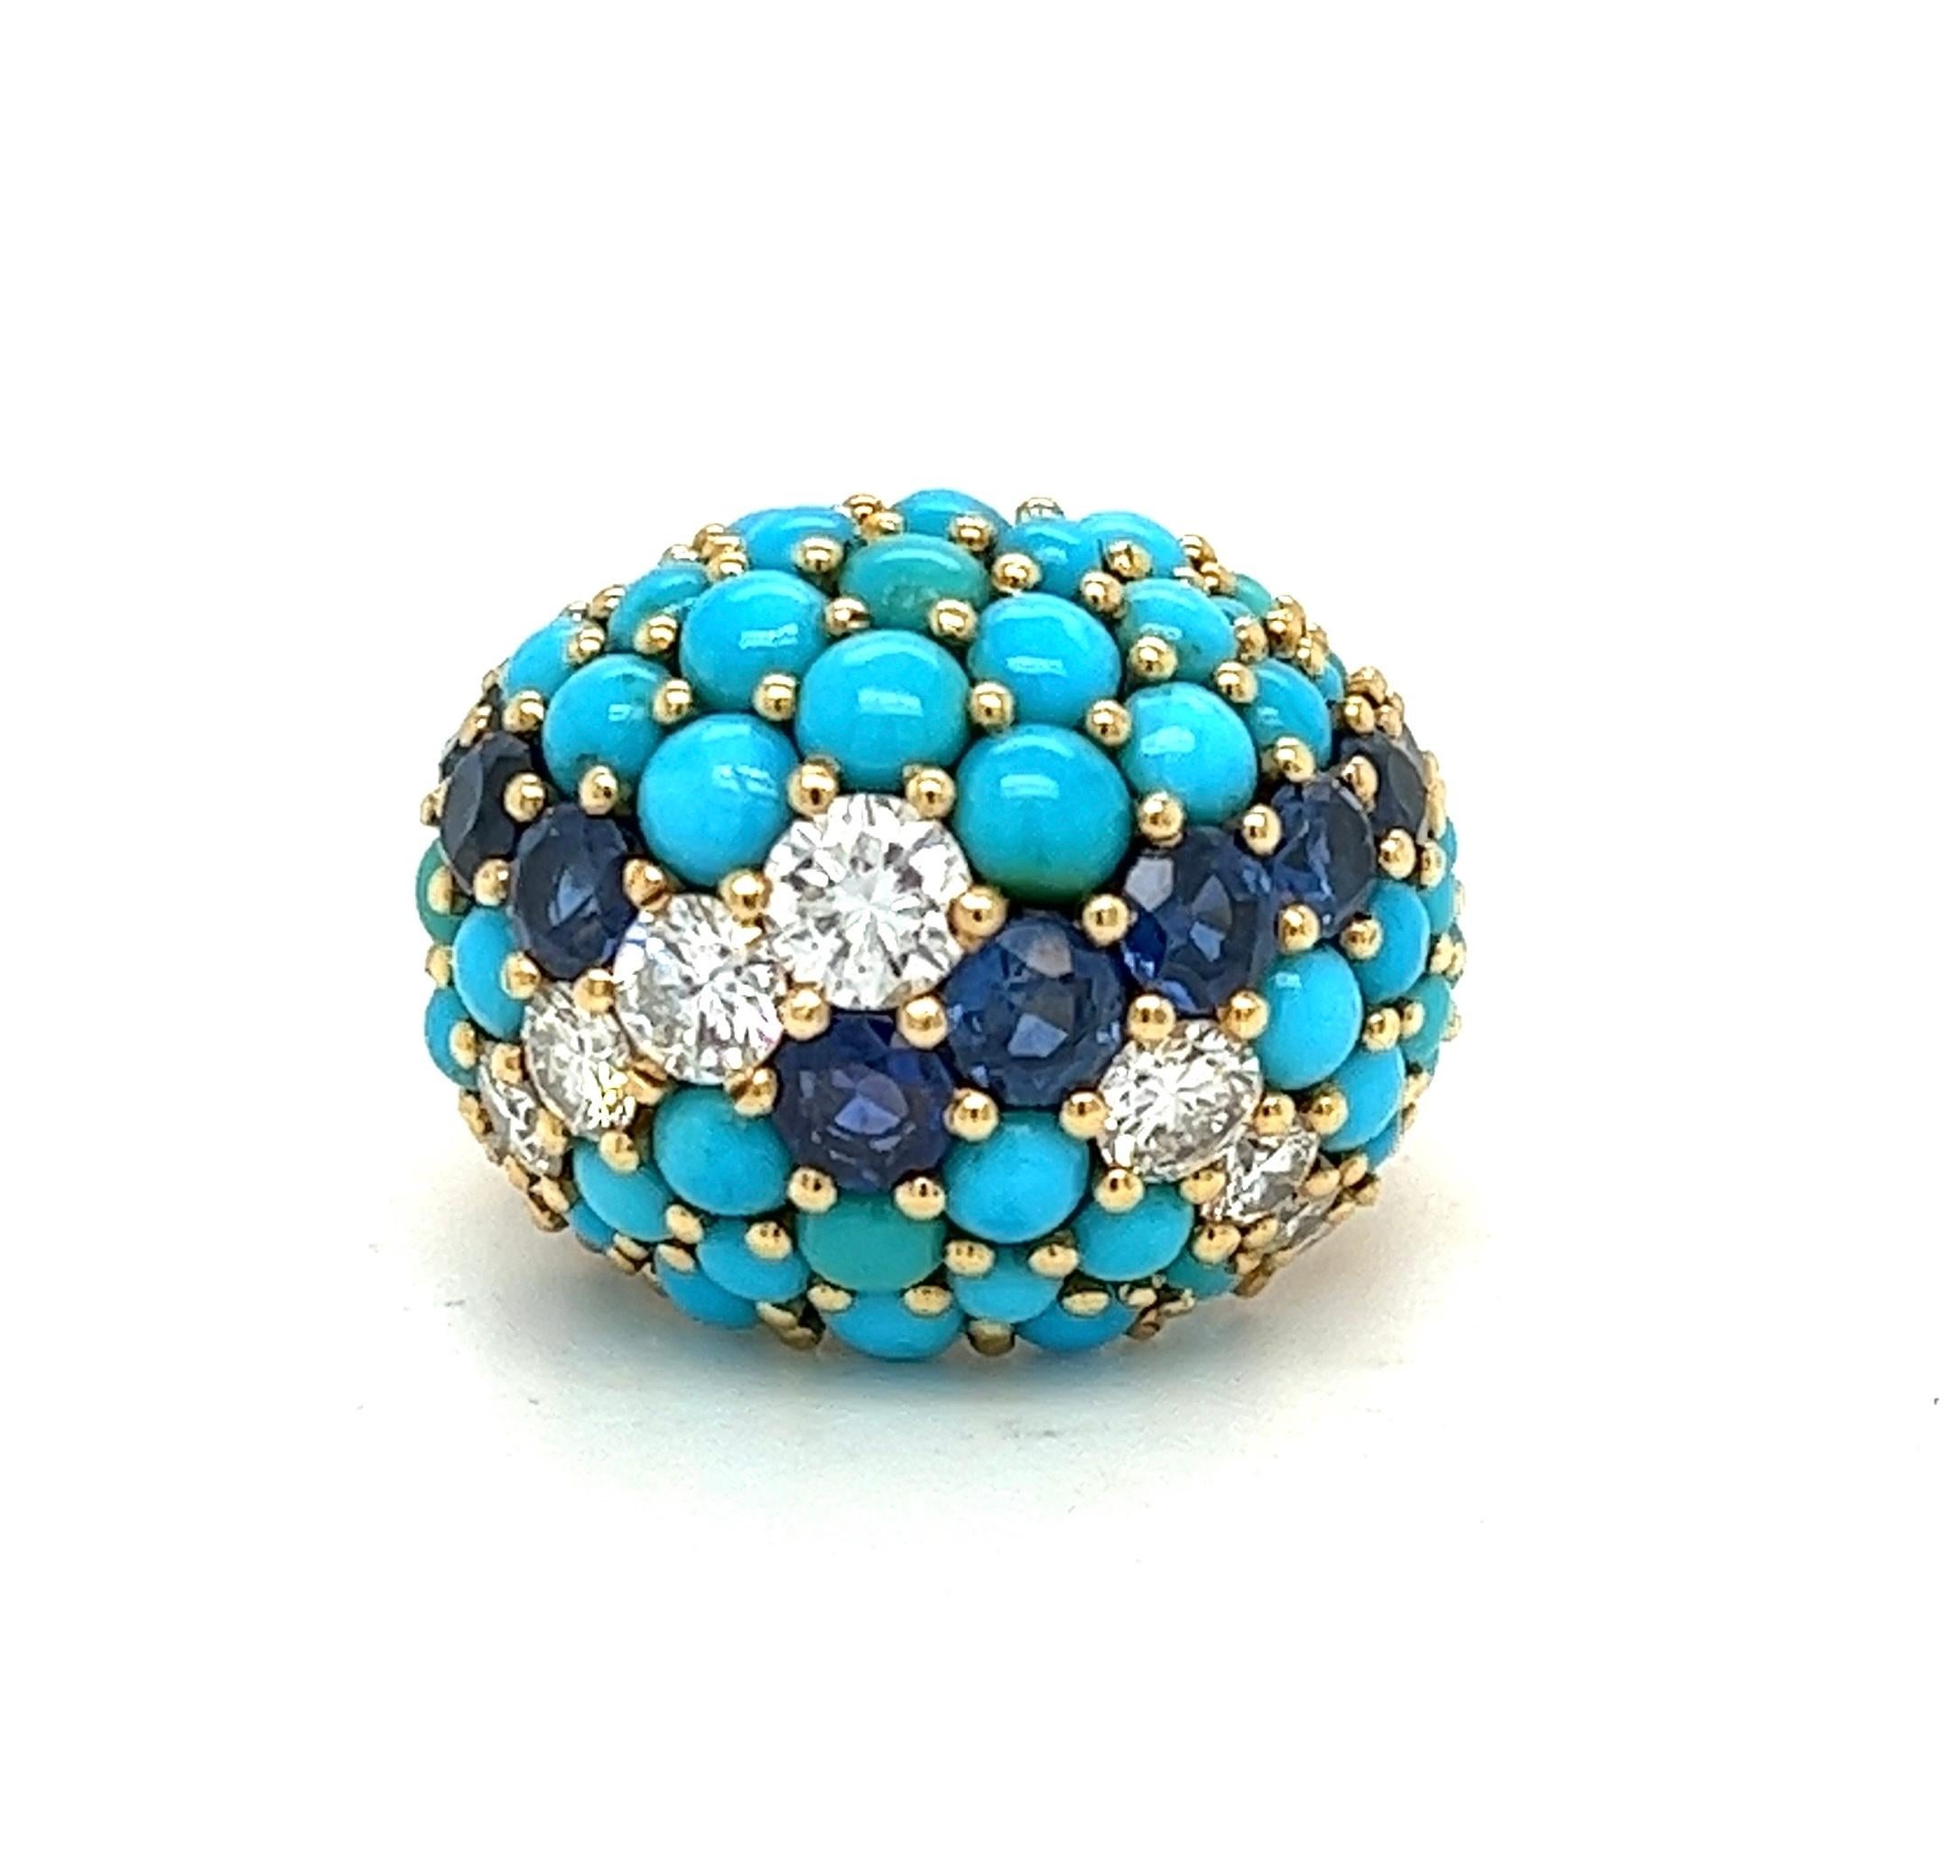 Offered here is one Yellow gold ( stamped on the outside of the shank with a French hallmark indicating 18K gold and an additional illegible stamp ) lady's high dome, bombe' shape turquoise, sapphire and diamond set ring.
The ring is multi-prong set